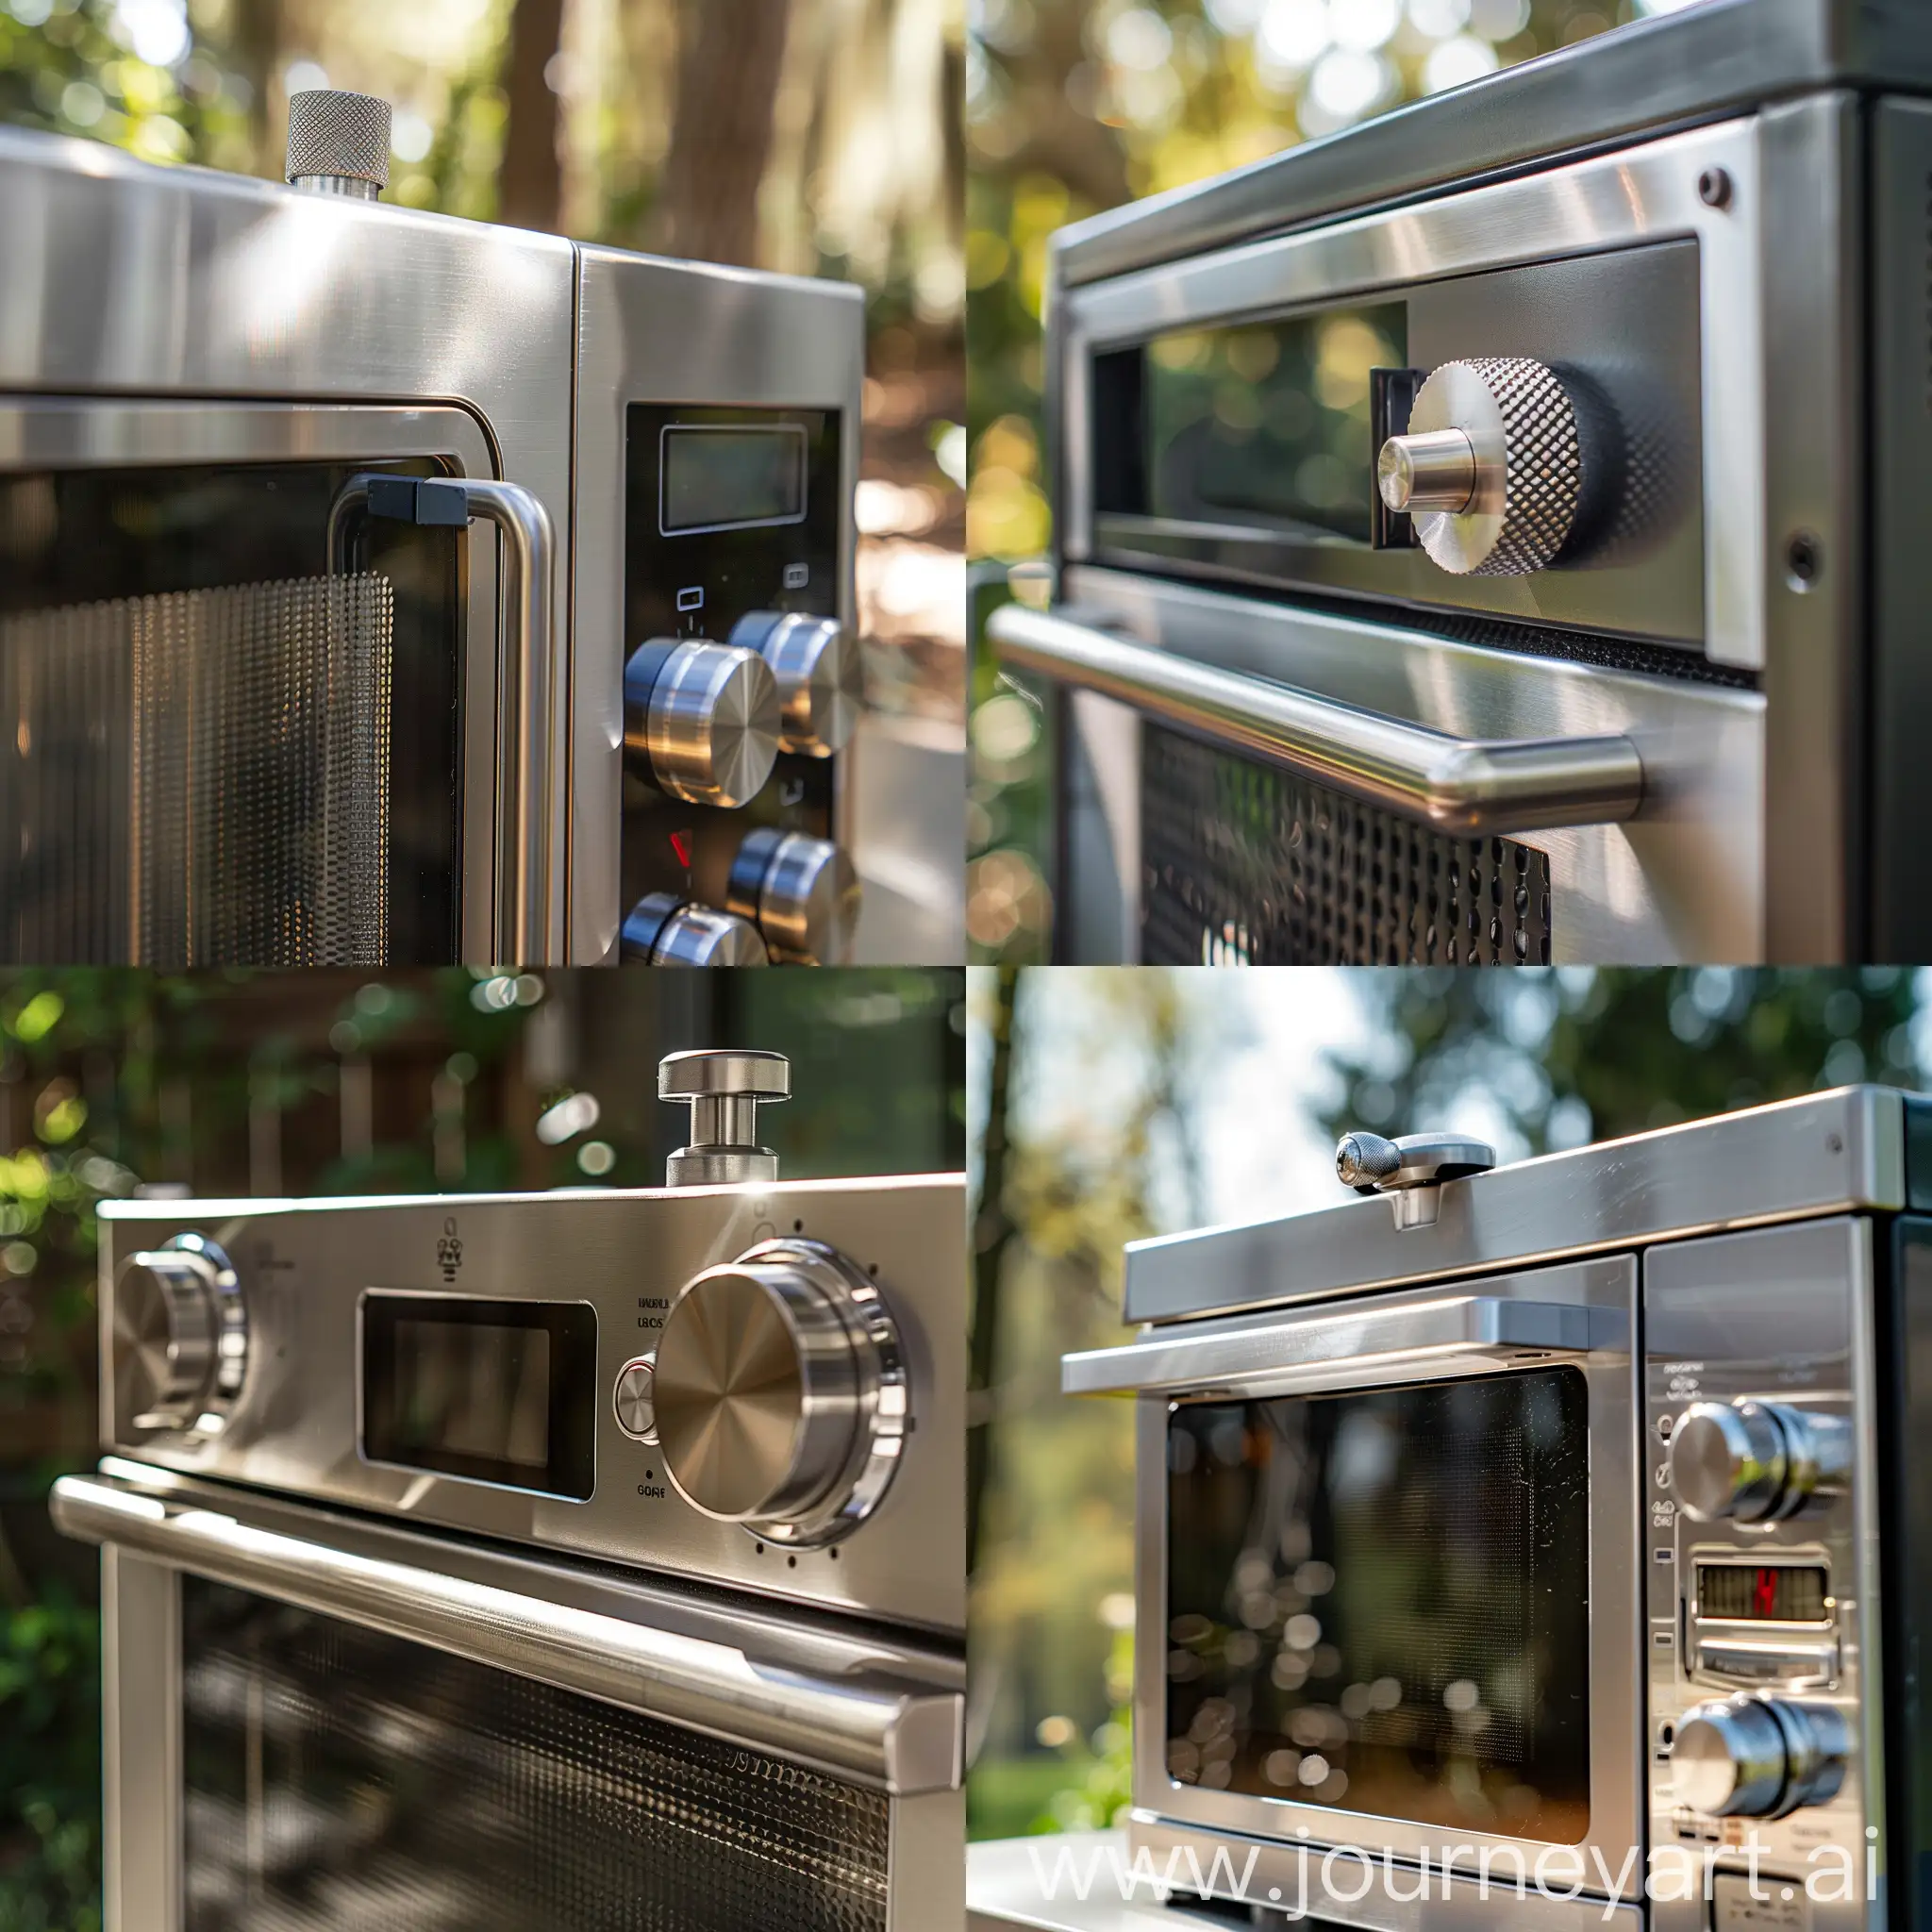 Outdoor microwave, mechanical tough style, knob above microwave, metallic, natural light, side view, clear details, cool tones, industrial style, durable, practical.